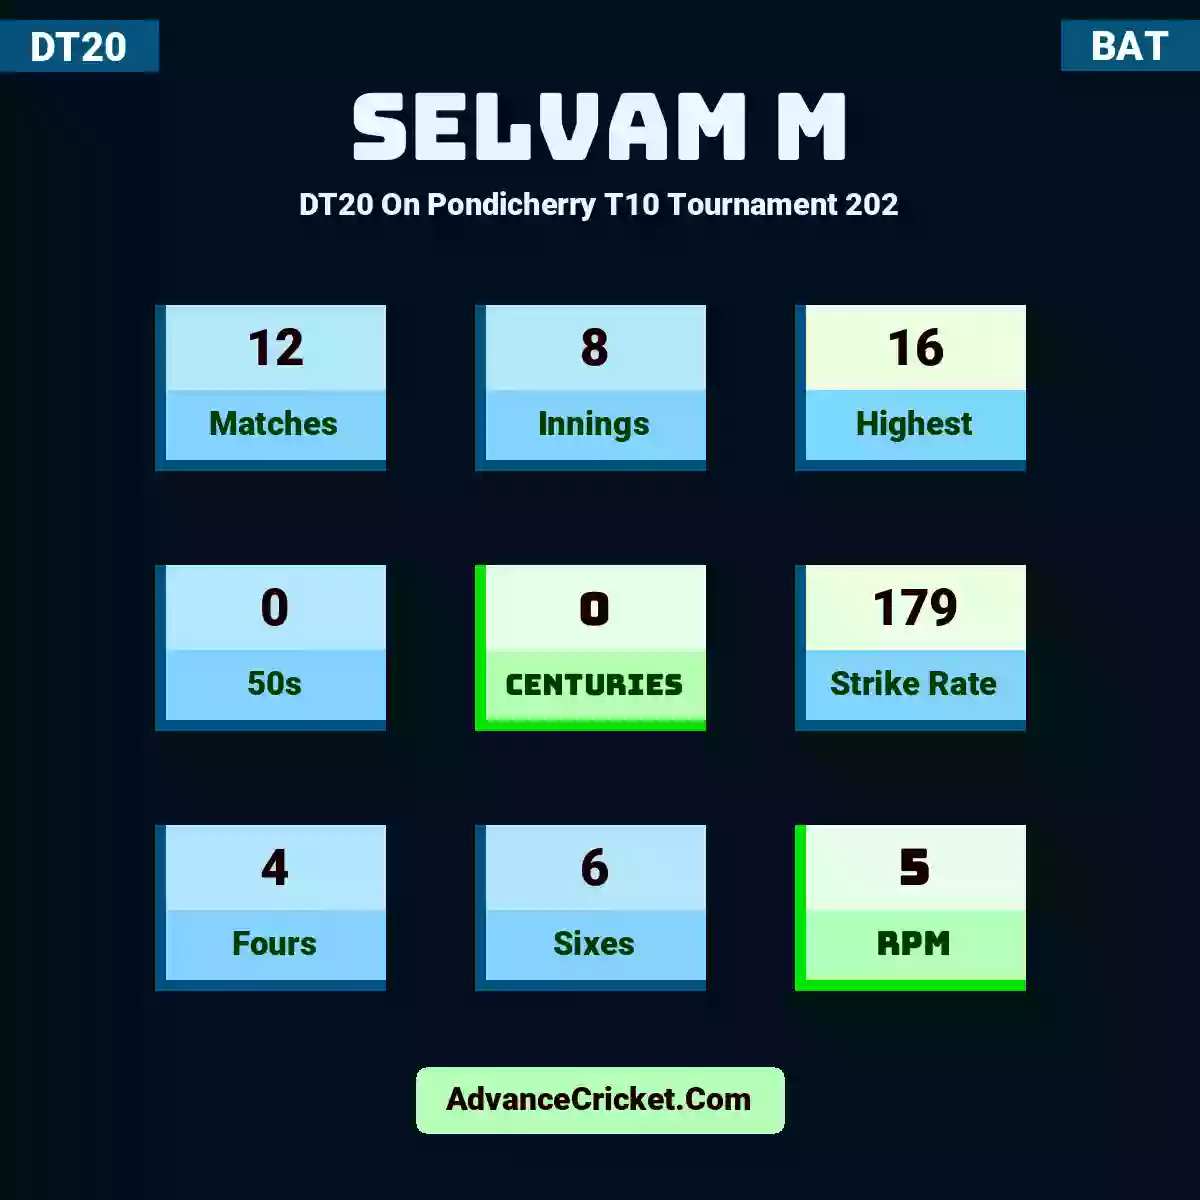 Selvam M DT20  On Pondicherry T10 Tournament 202, Selvam M played 12 matches, scored 16 runs as highest, 0 half-centuries, and 0 centuries, with a strike rate of 179. S.M hit 4 fours and 6 sixes, with an RPM of 5.